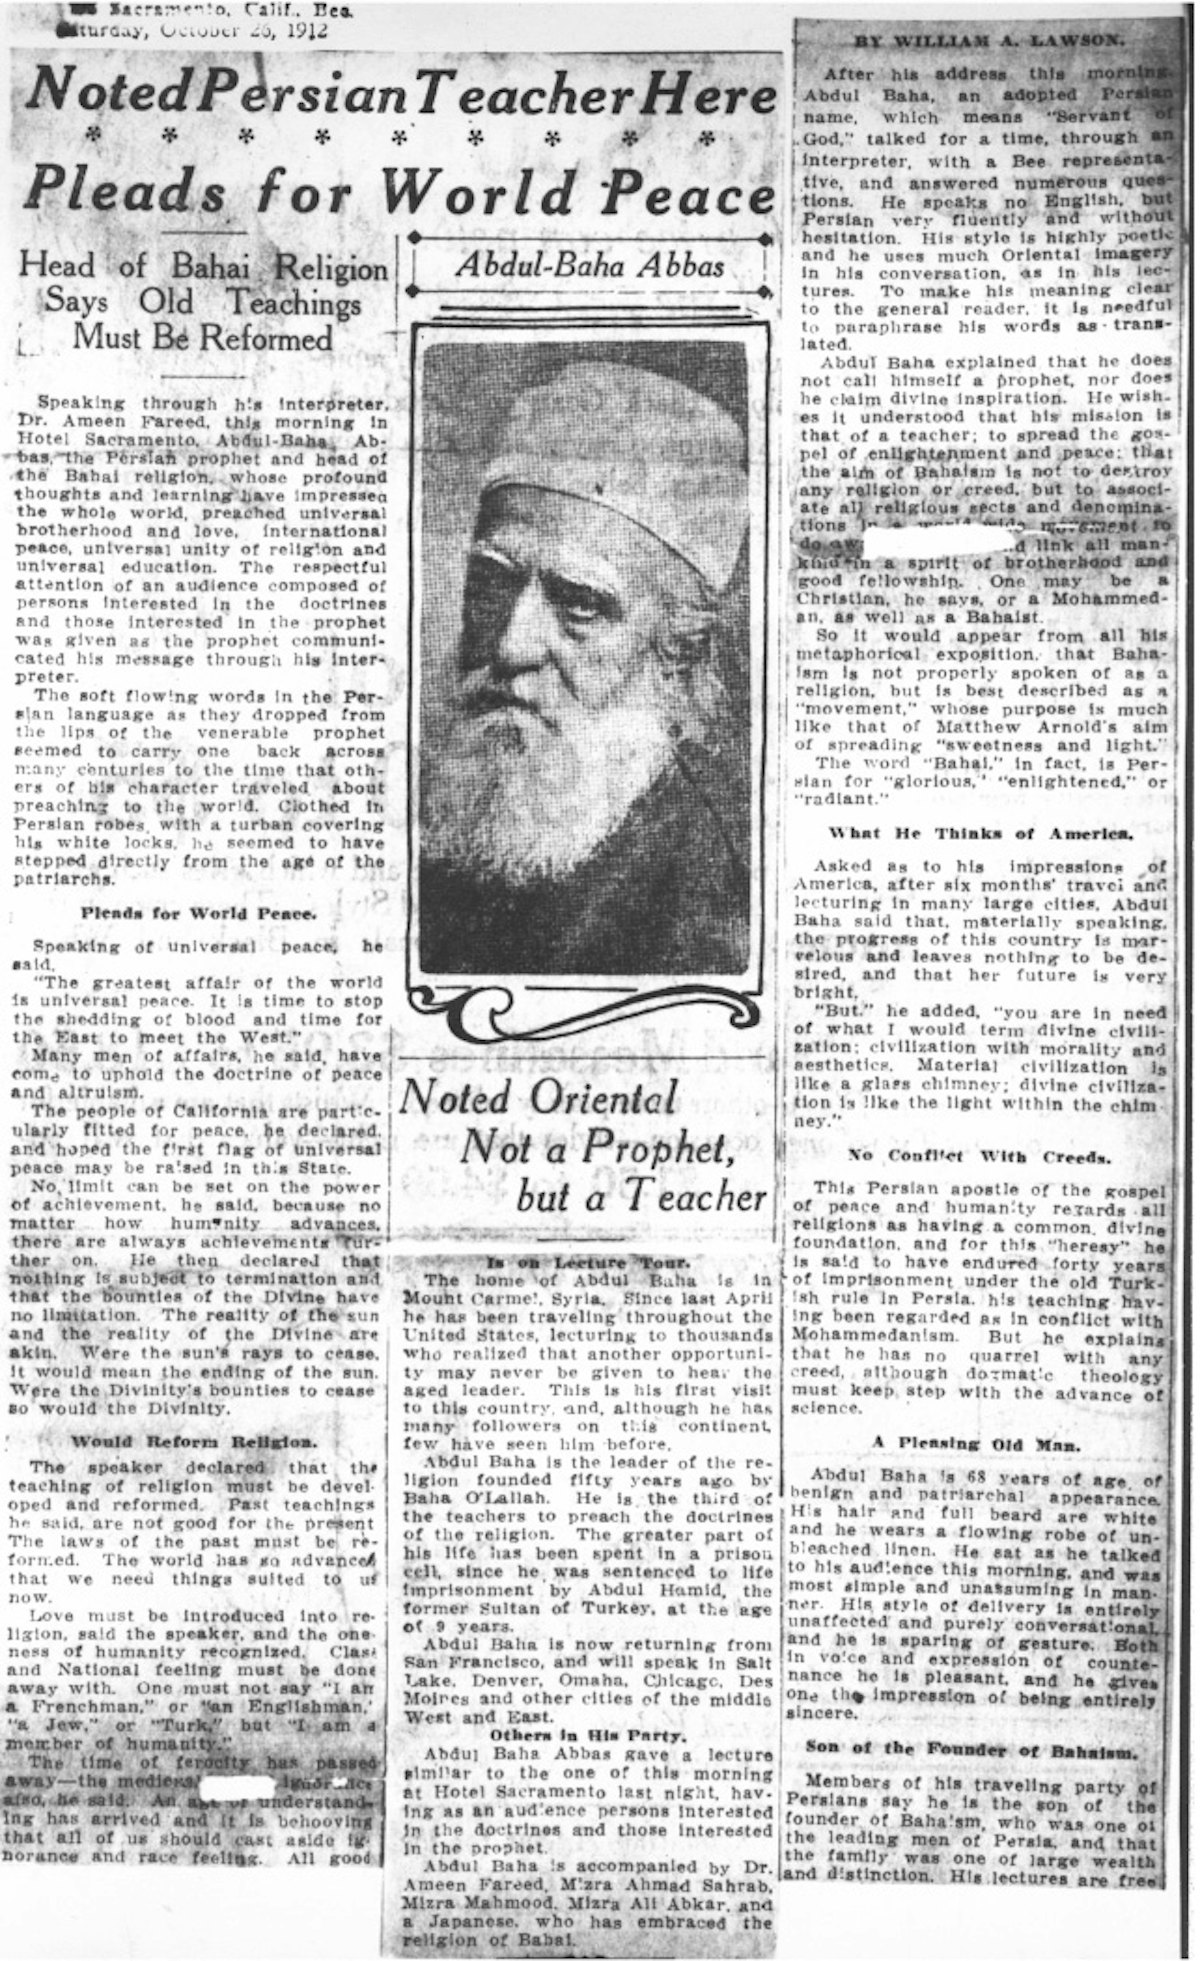 This article published in the Sacramento Bee on 26 October 1912 reports on ‘Abdu’l-Baha’s talk about peace, given earlier in the day. “The greatest affair of the world is universal peace. It is time to stop the shedding of blood…,” the newspaper quotes Him as saying.